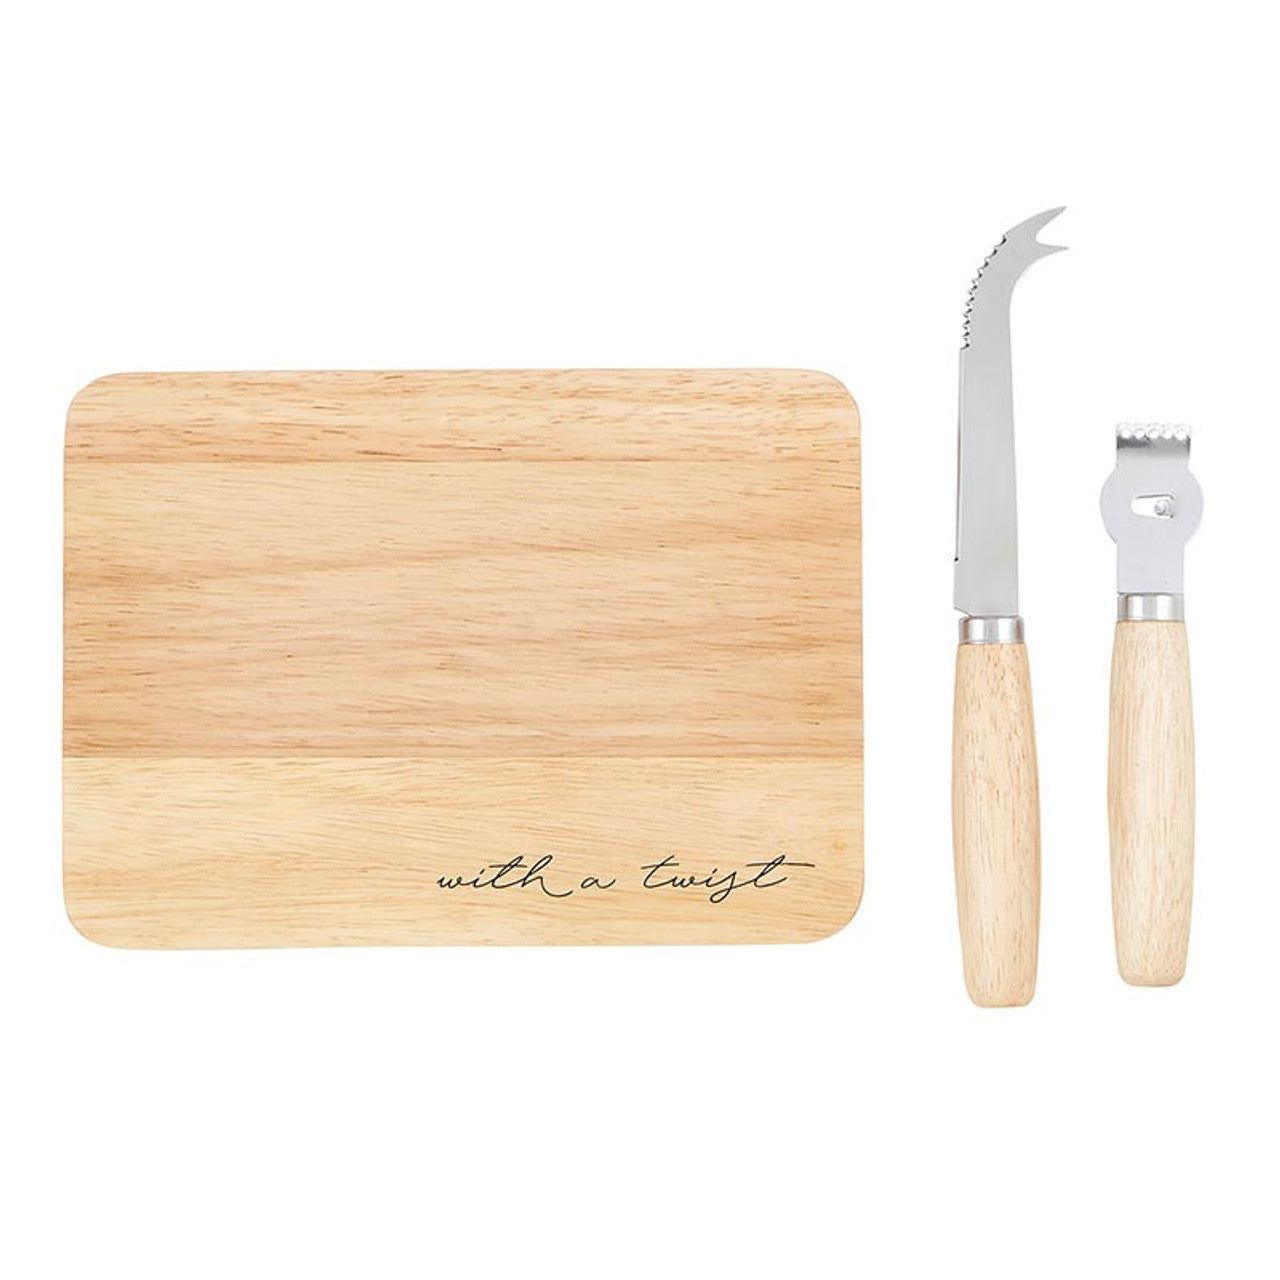 Gift Box: Cocktail Garnish Book Box With a Twist | Cutting board, Knife, and Zester Gift Set